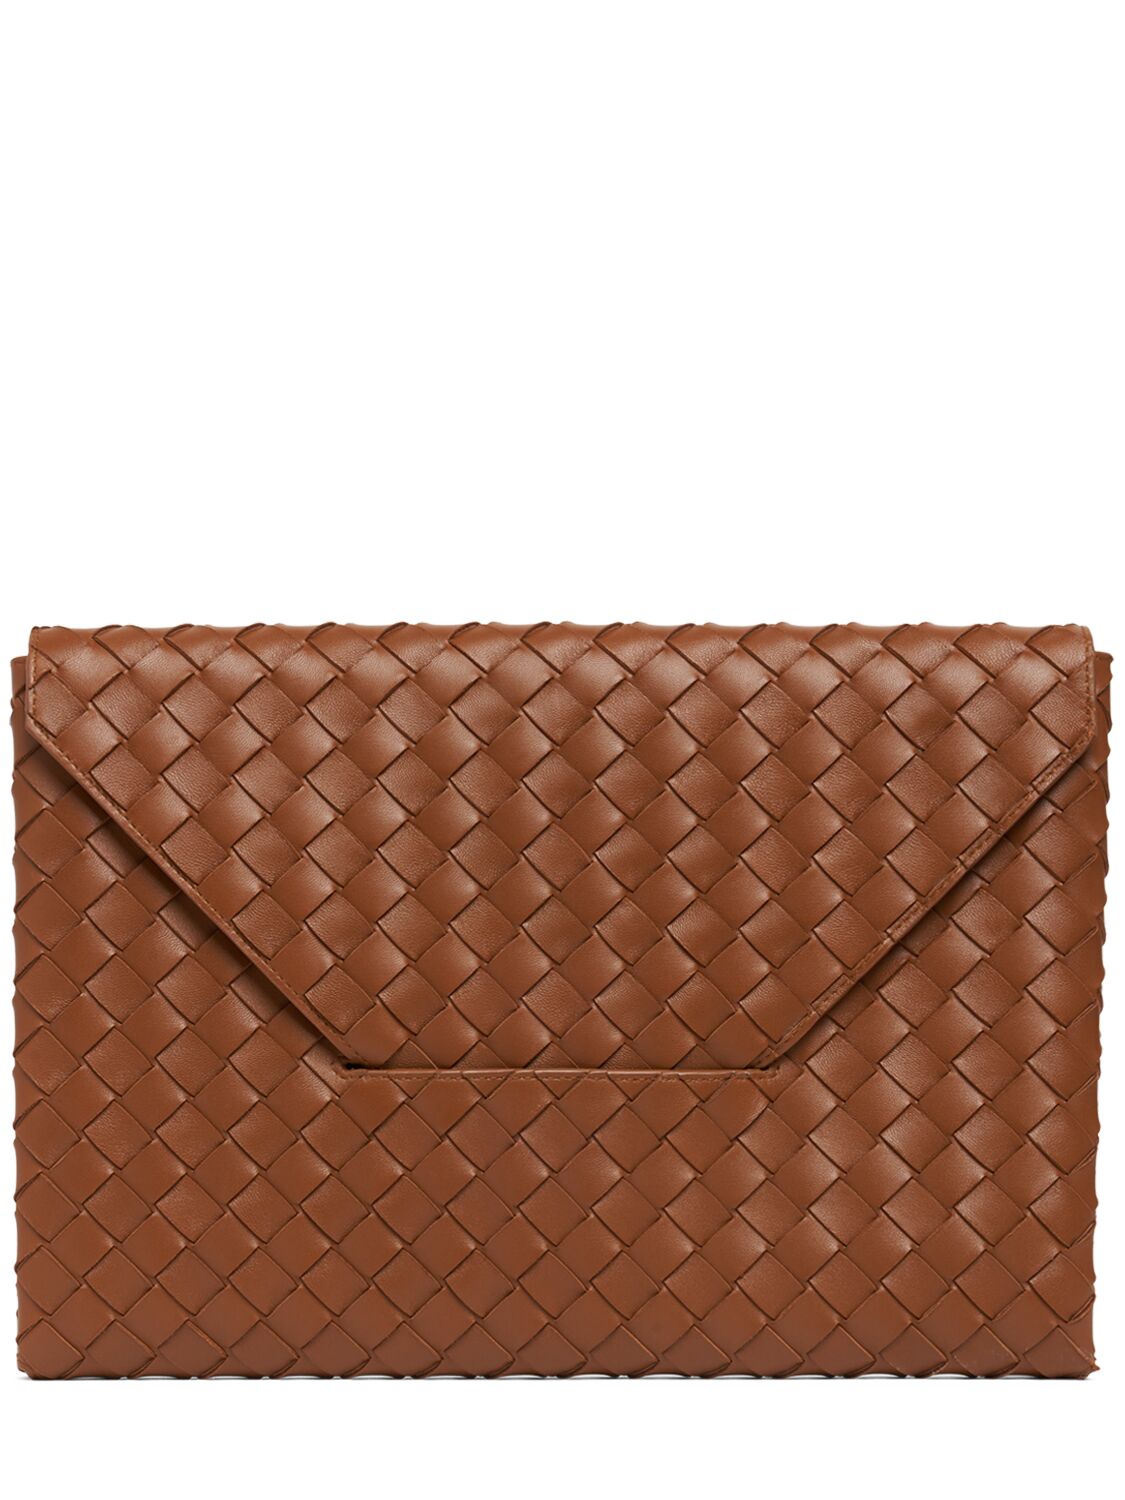 Large Origami Leather Envelope Pouch